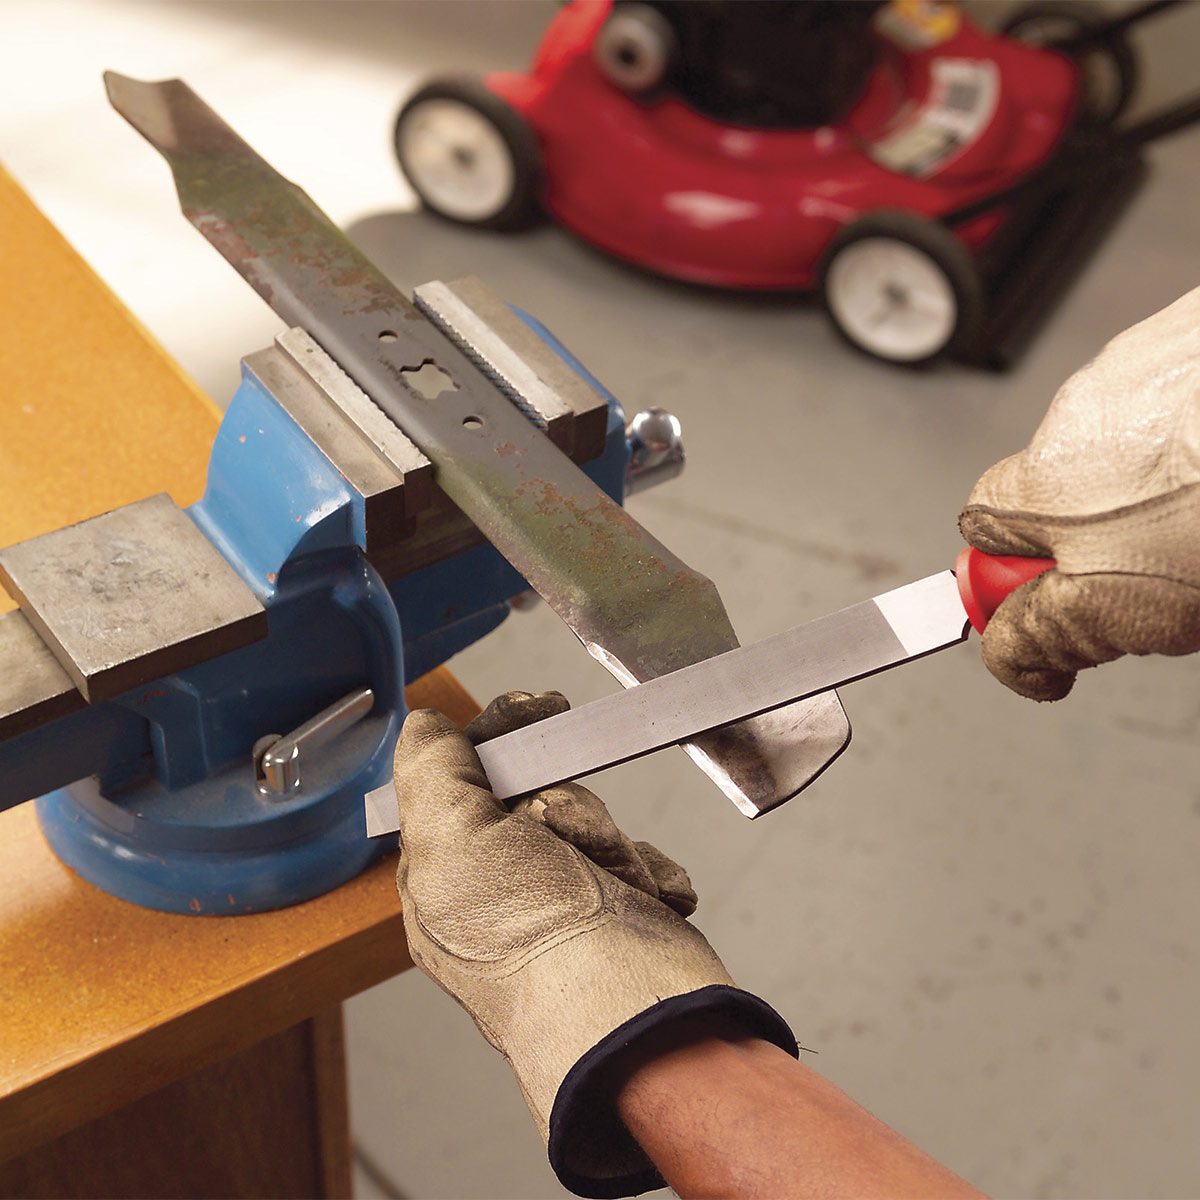 sharpening lawn mower blade with a file